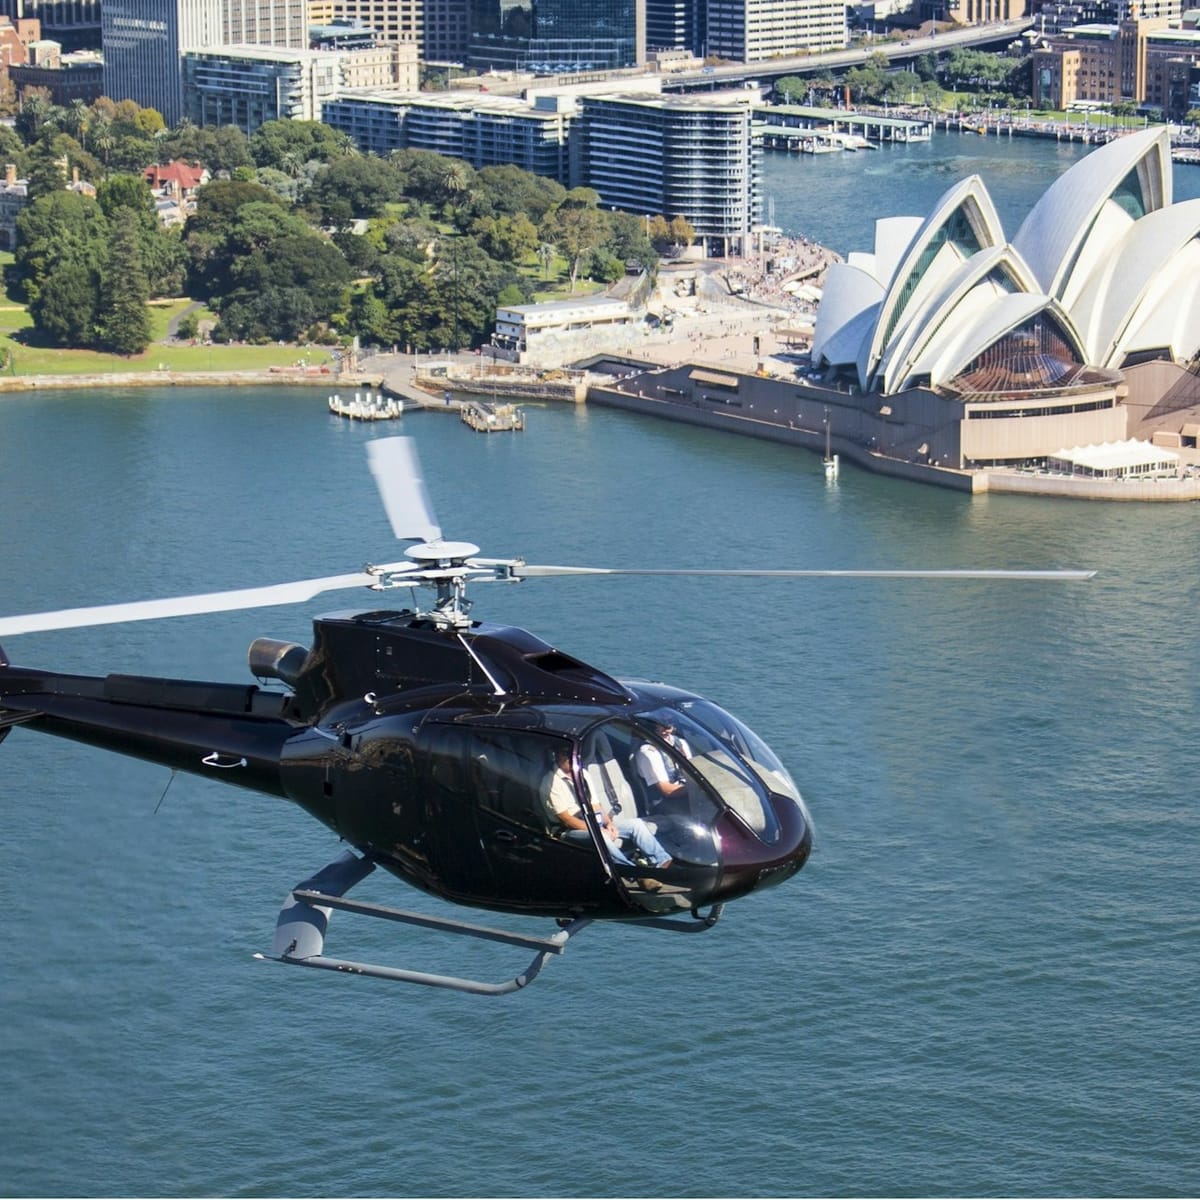 sydney-helicopter-tour-20-minute-private-scenic-helicopter-flight_1